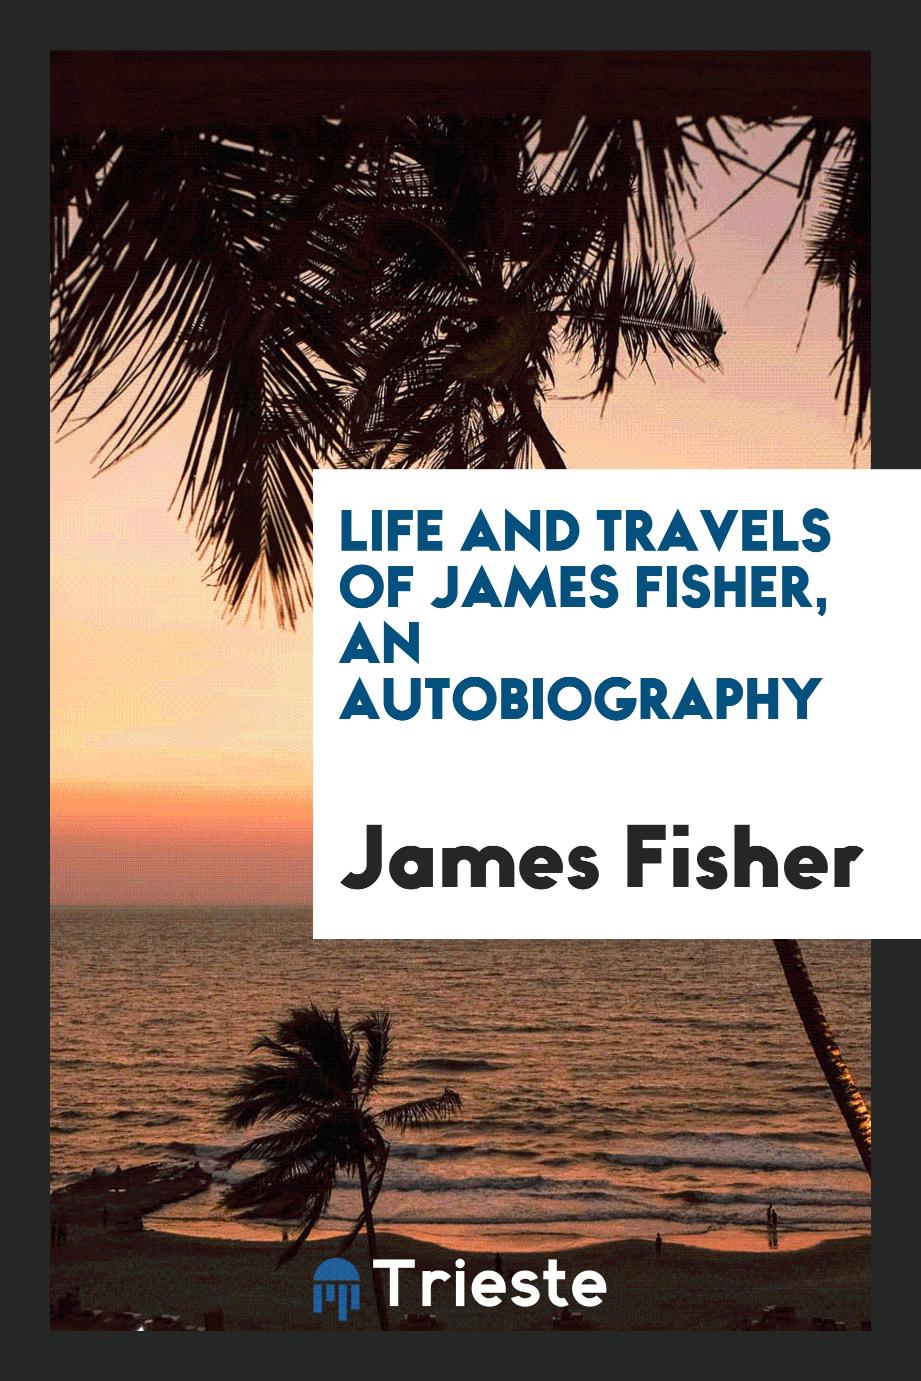 Life and travels of James Fisher, an autobiography